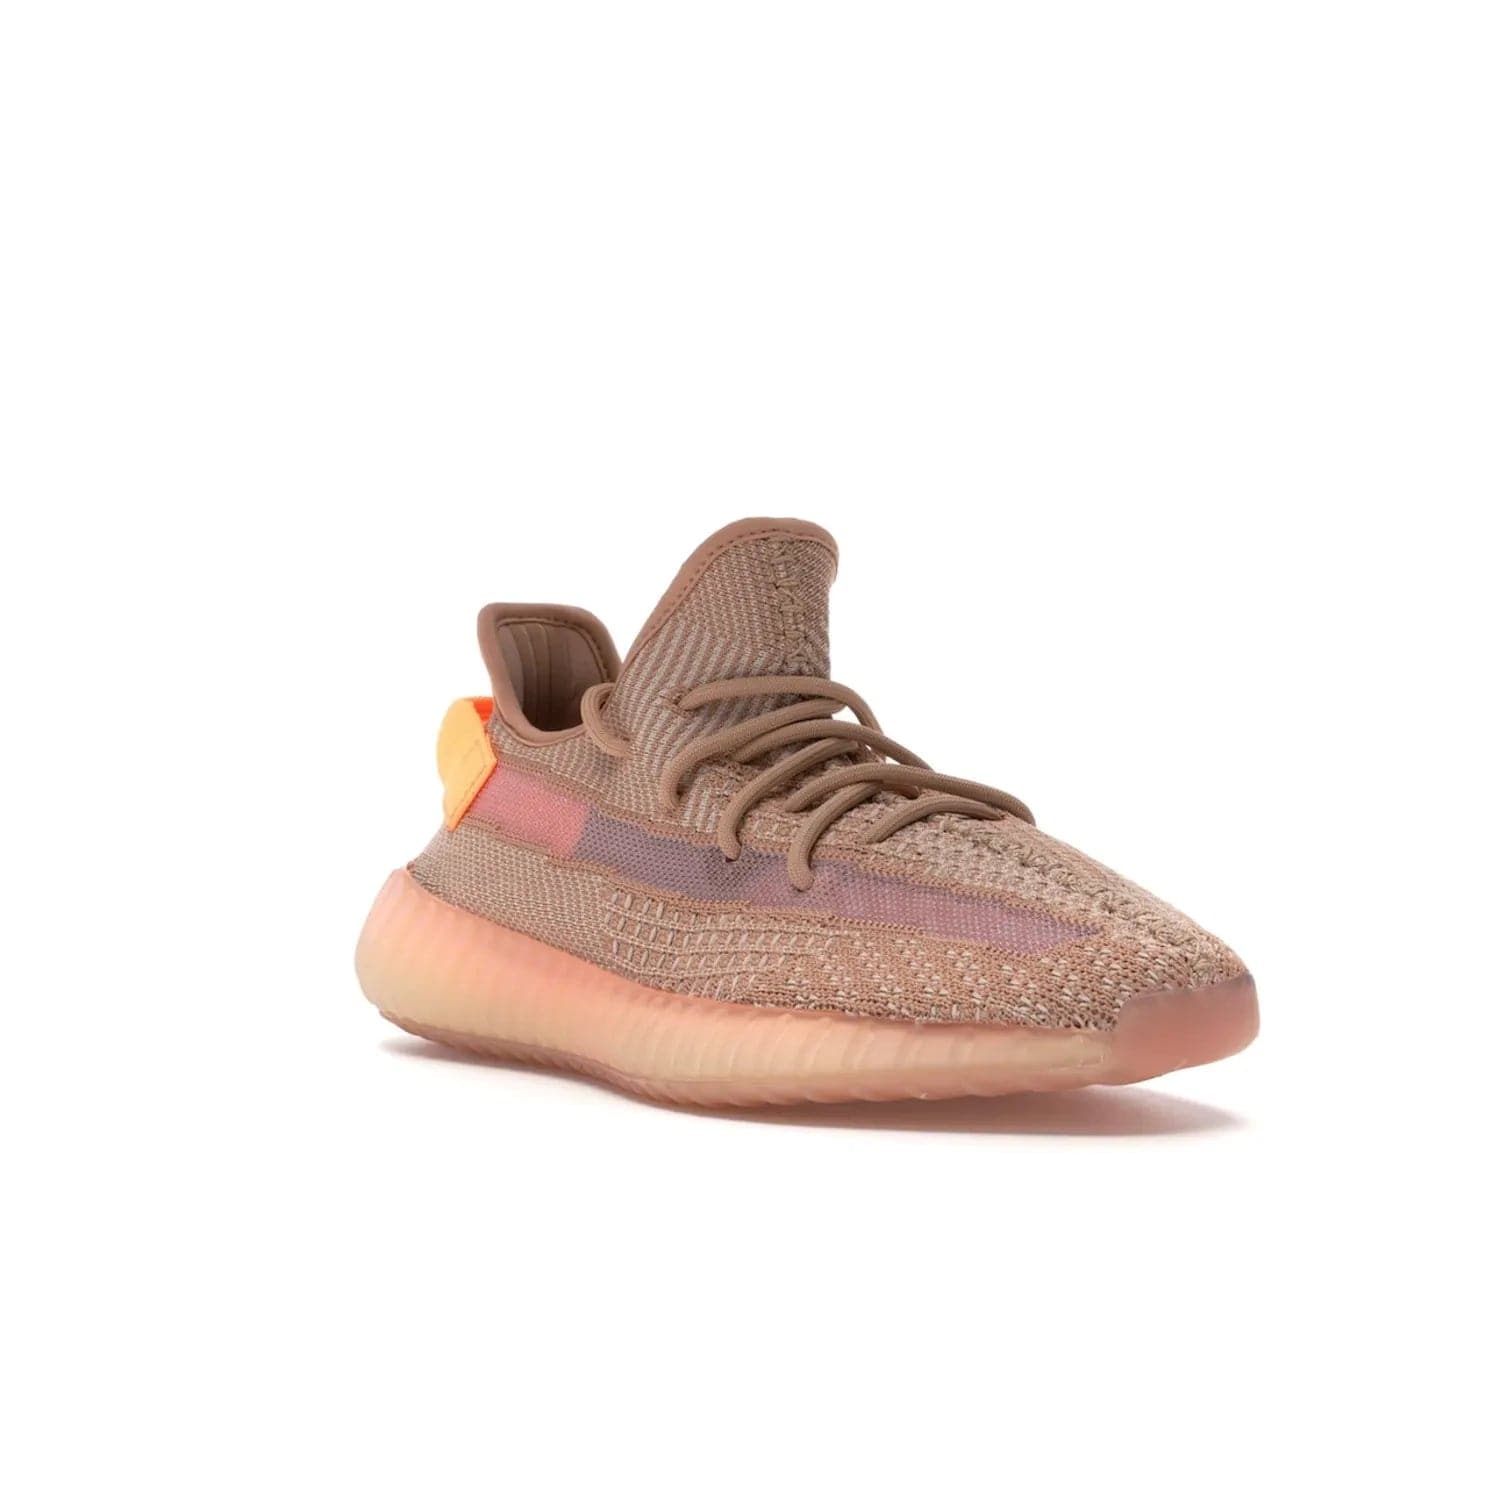 adidas Yeezy Boost 350 V2 Clay - Image 6 - Only at www.BallersClubKickz.com - The adidas Yeezy Boost 350 V2 Clay - style and swag in one shoe. Orange accents, clay midsole and sole. Get yours today!